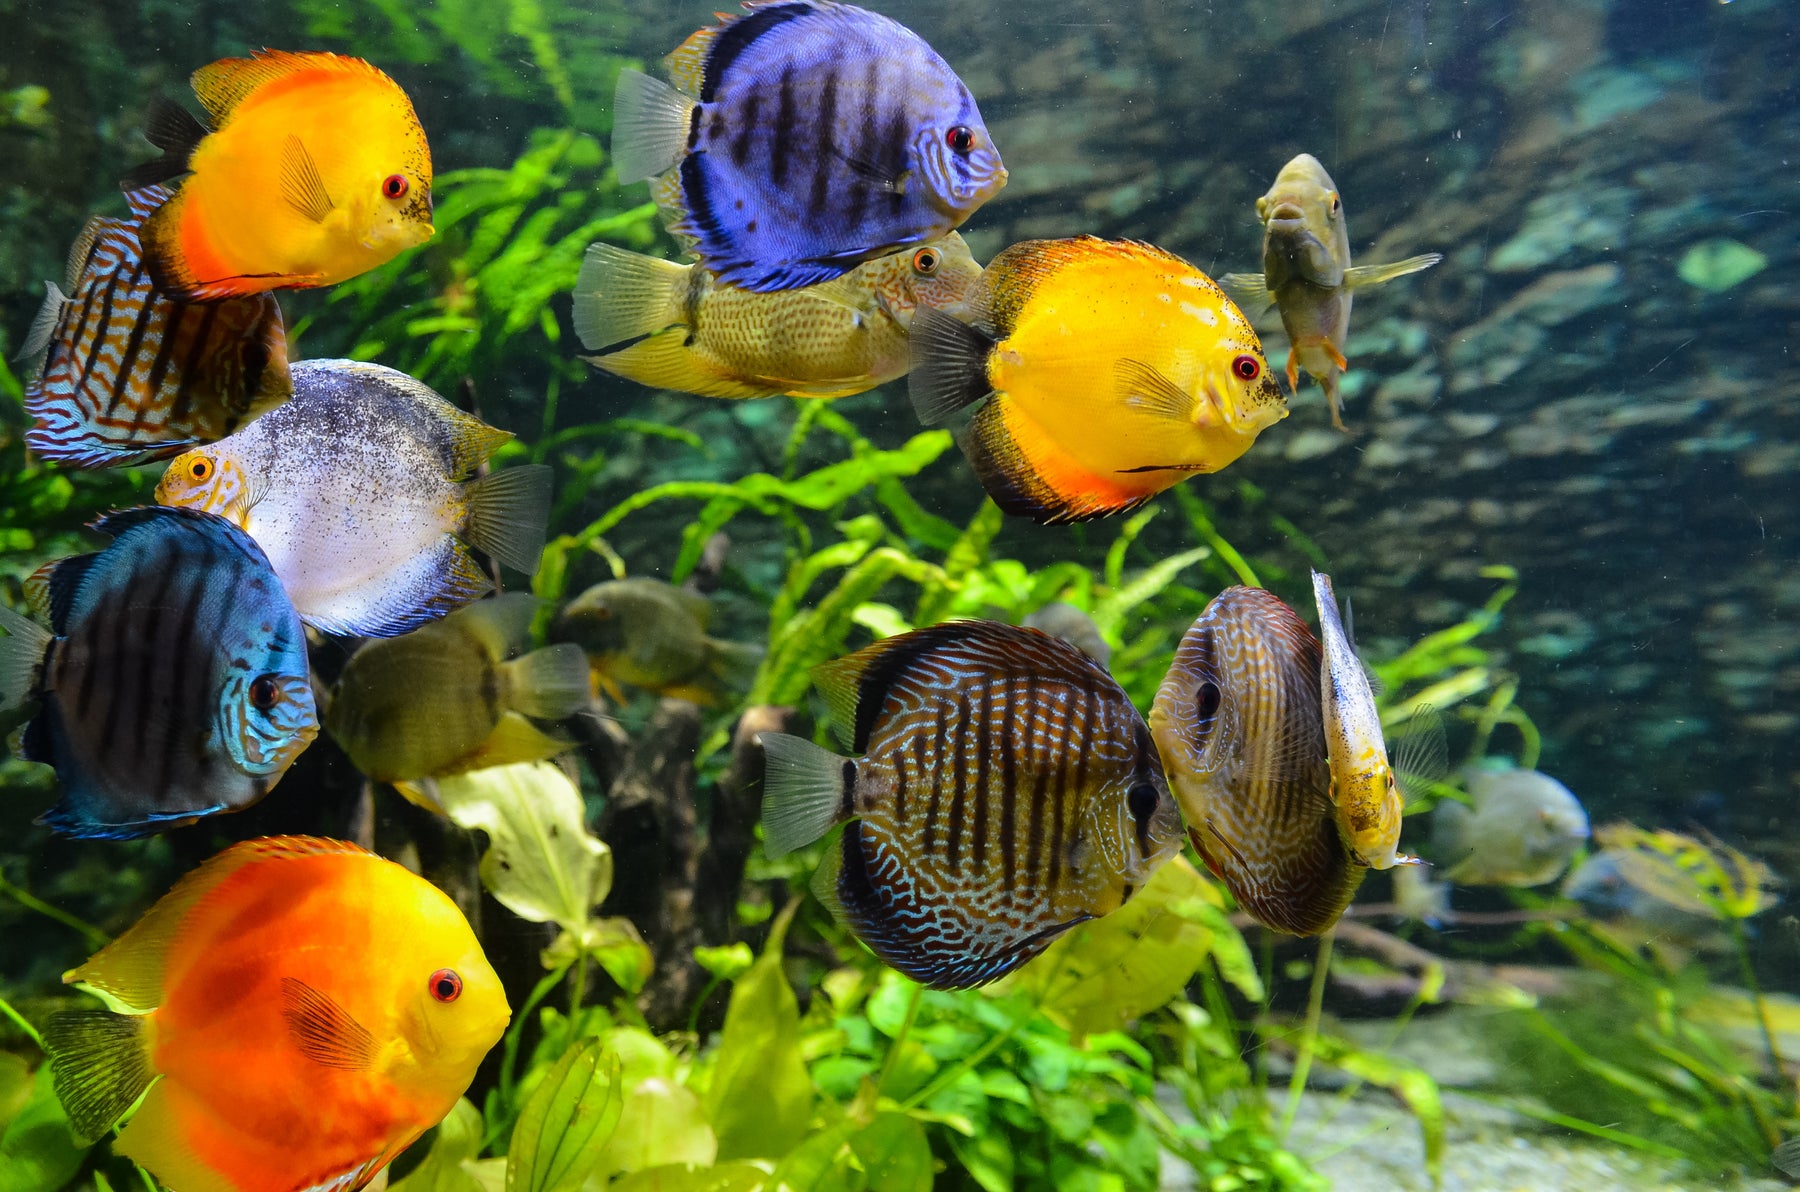 New Shipment of Discus has just arrived